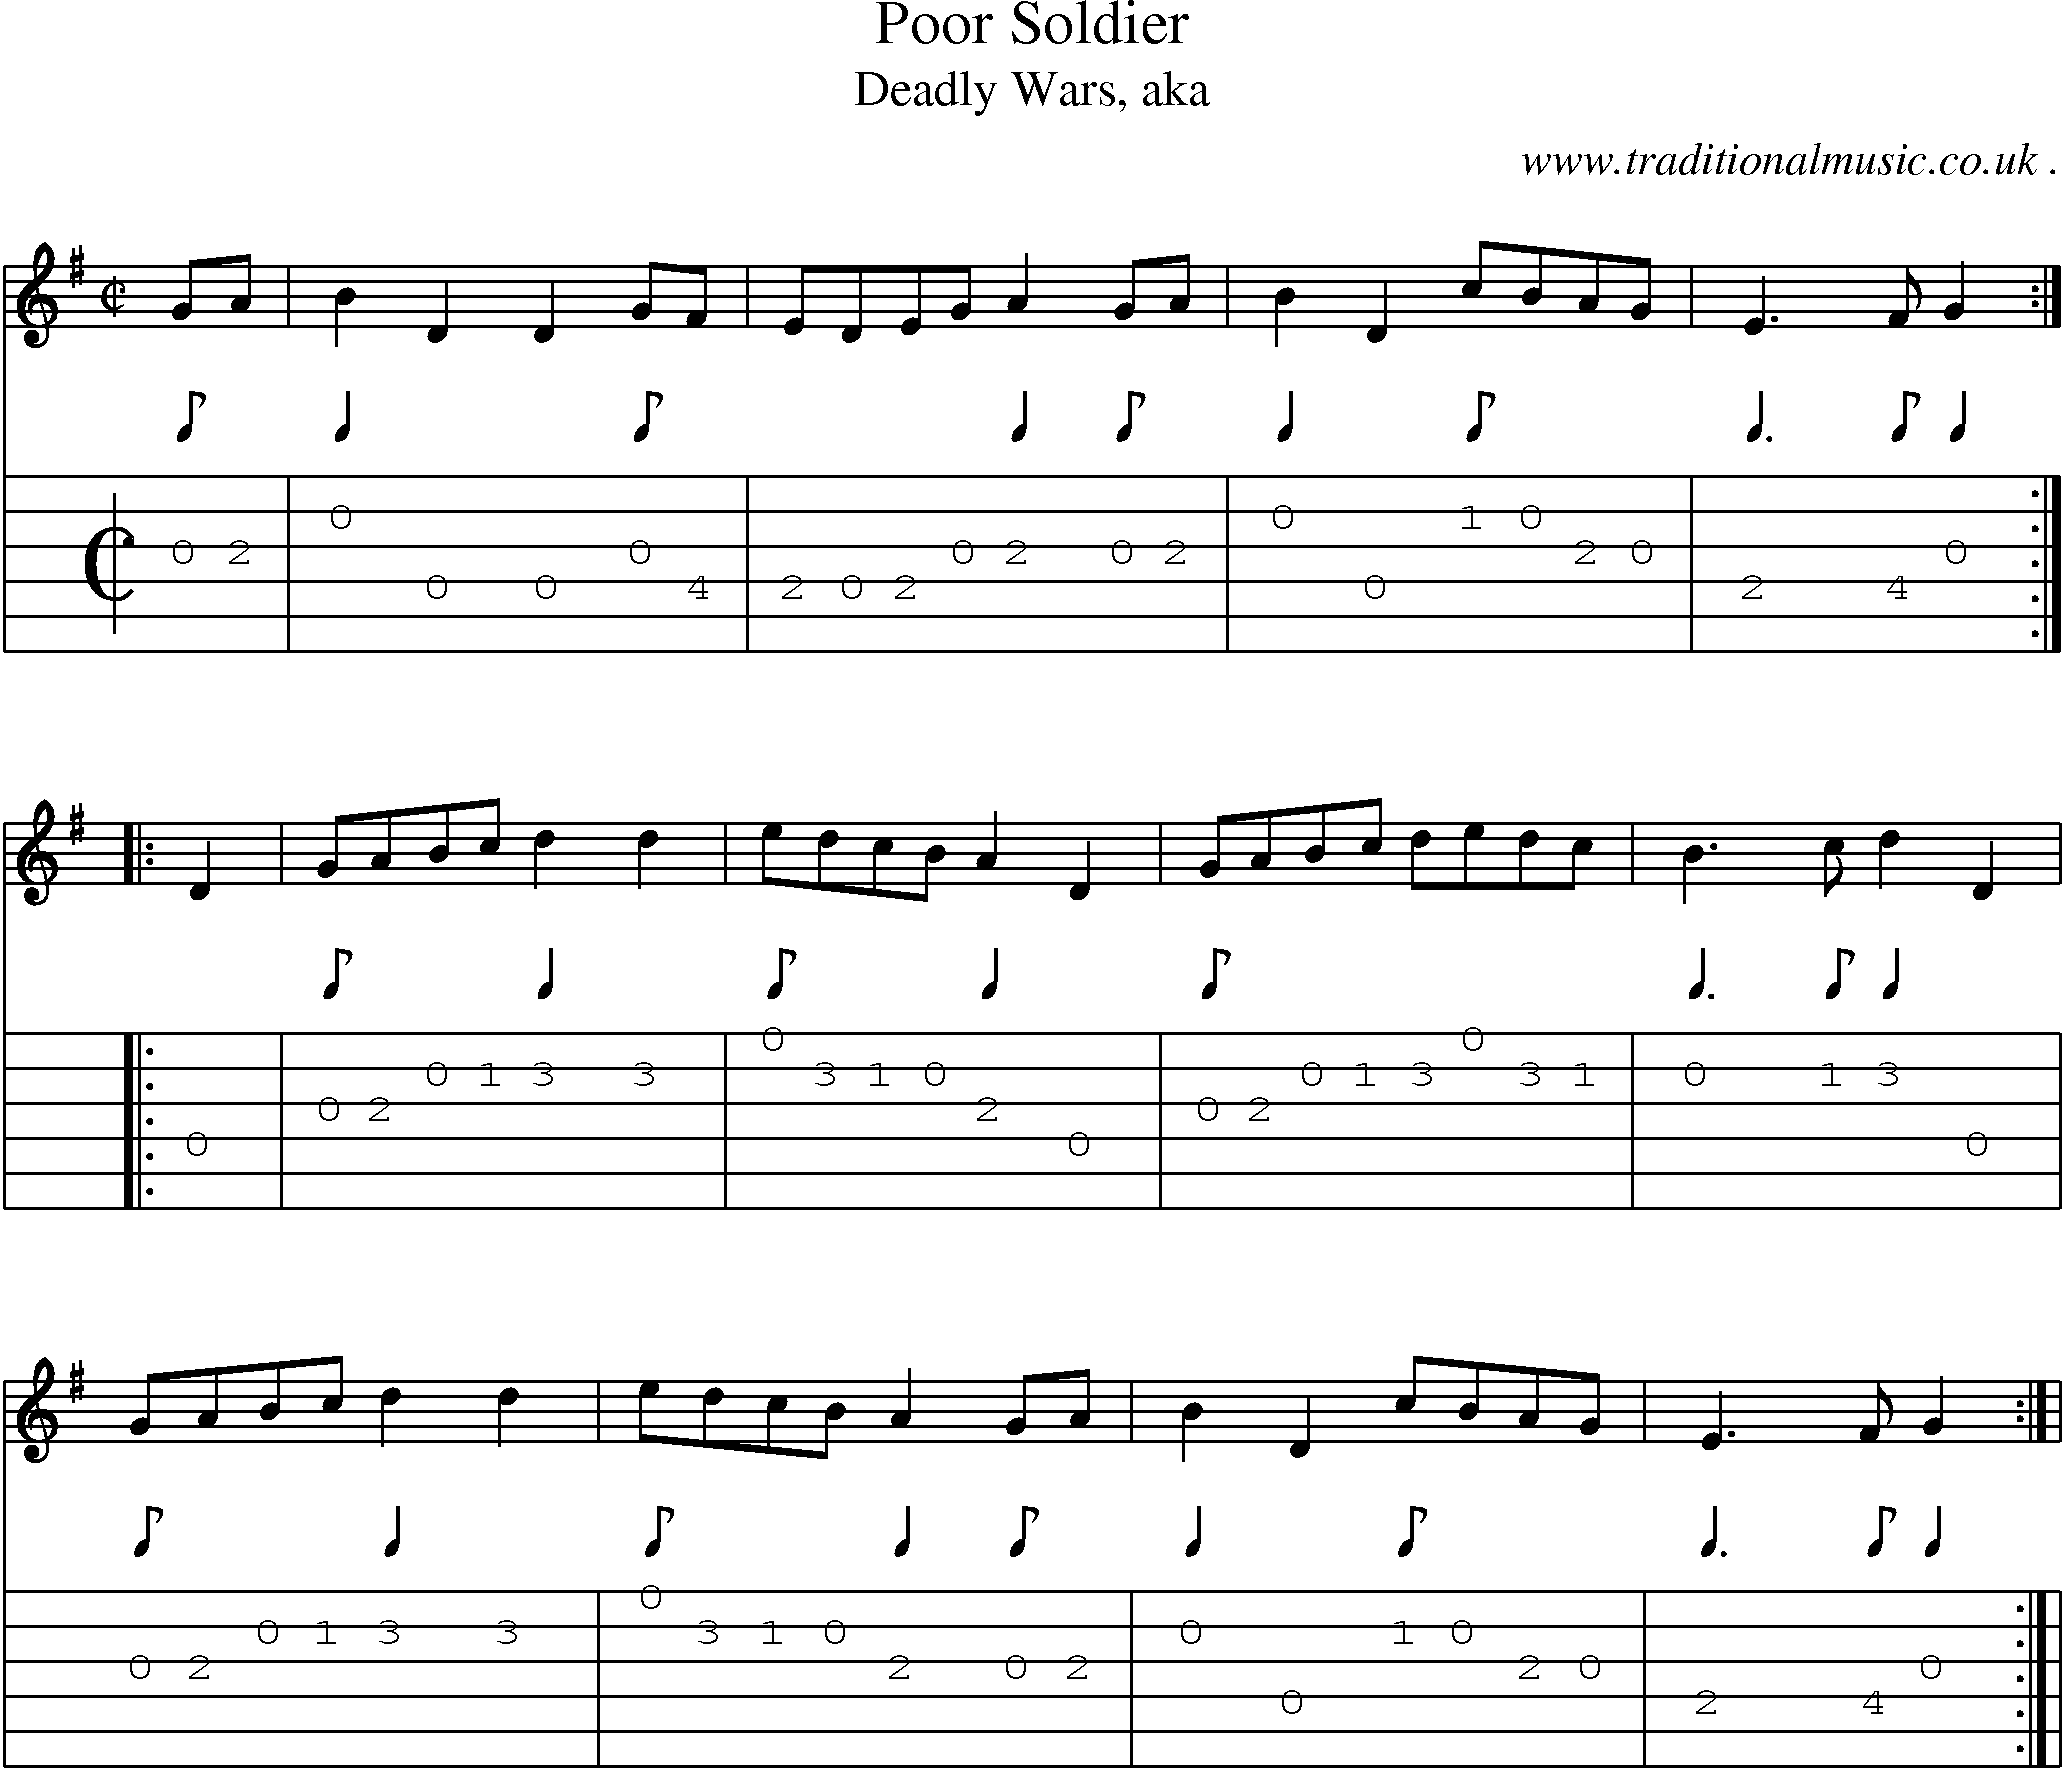 Sheet-Music and Guitar Tabs for Poor Soldier